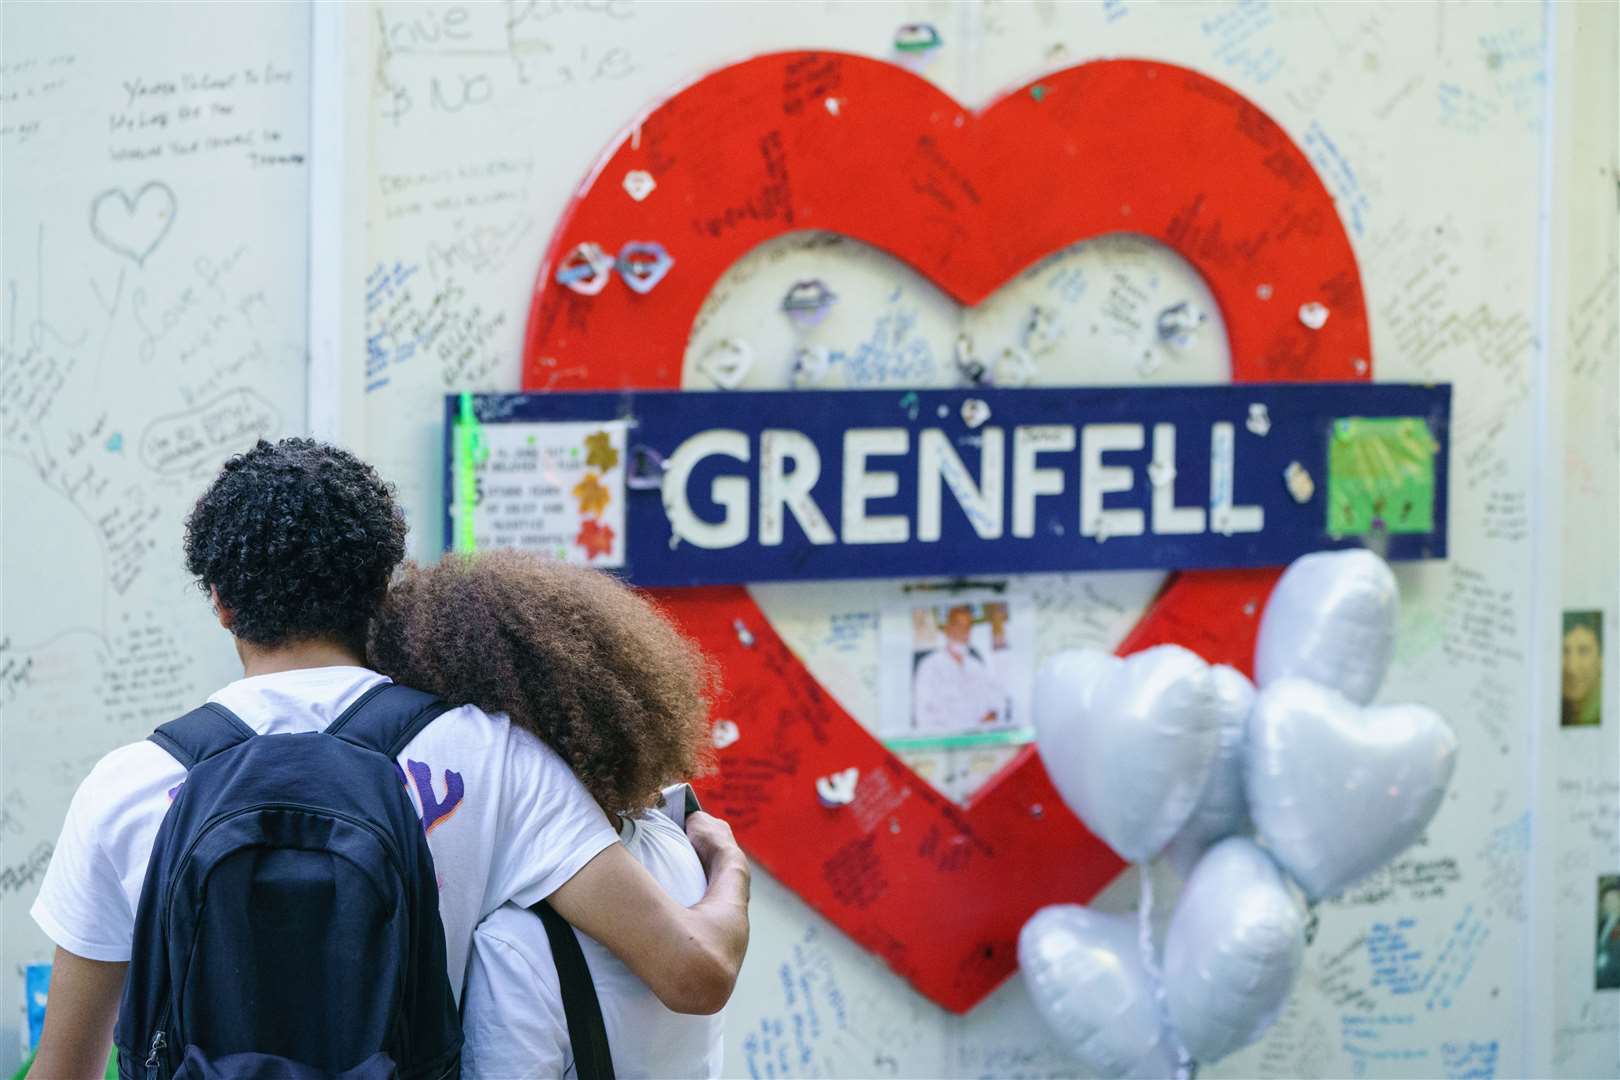 A multi-faith and wreath-laying ceremony at the base of Grenfell Tower (Dominic Lipinski/PA)